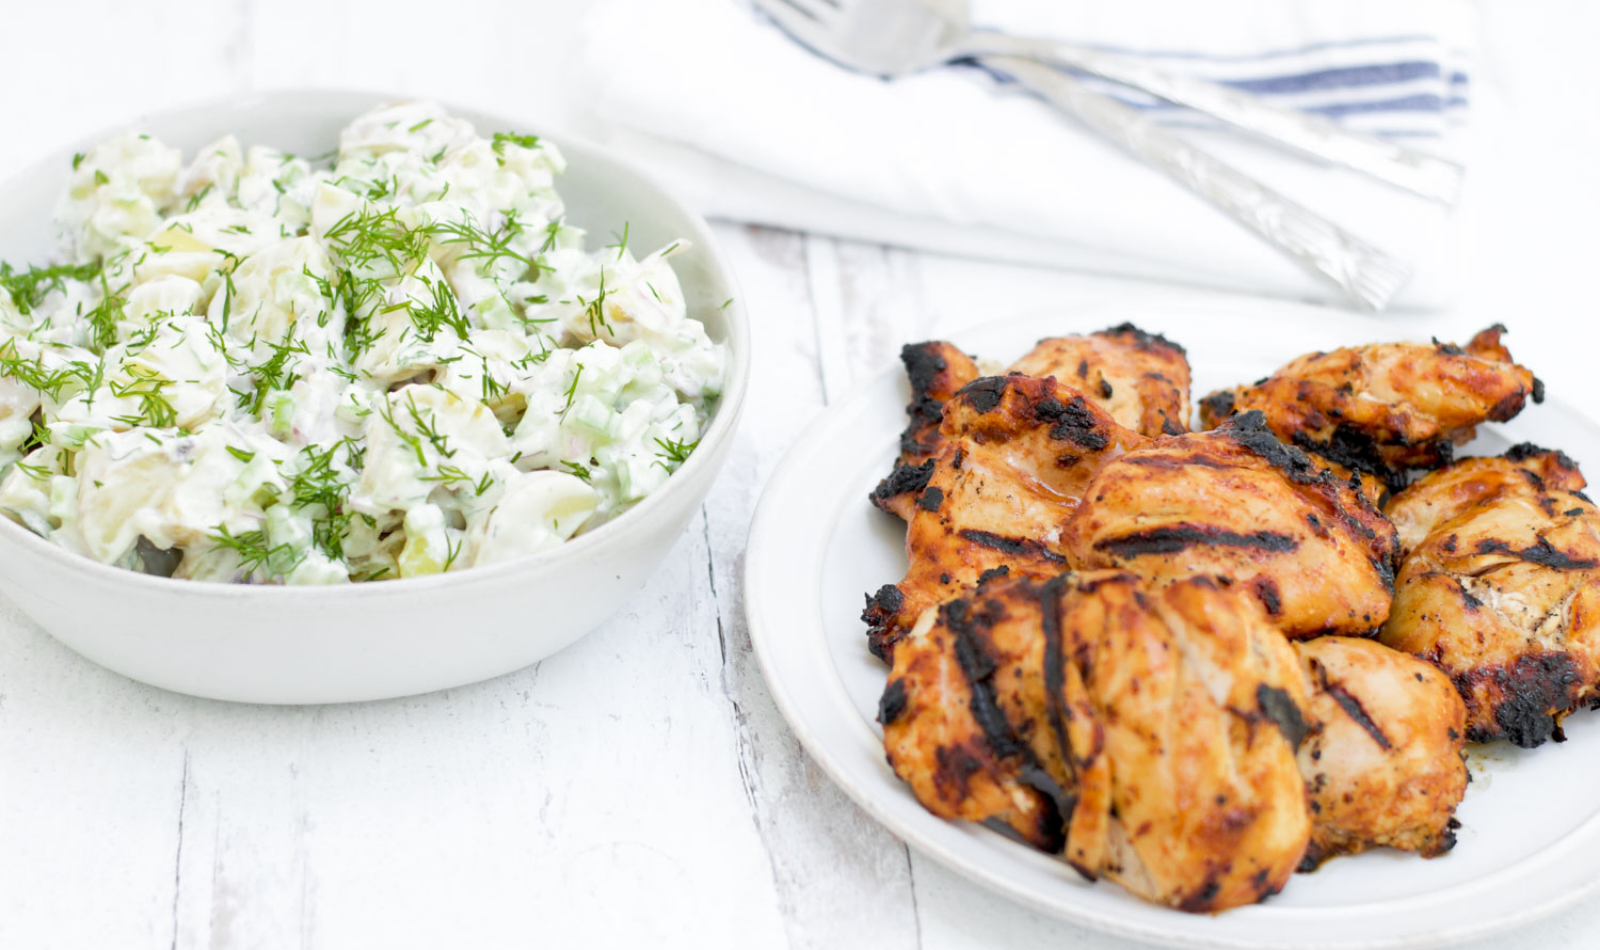 Blog Featured Image - BBQ Chicken with Lemon-Dill Potato Salad